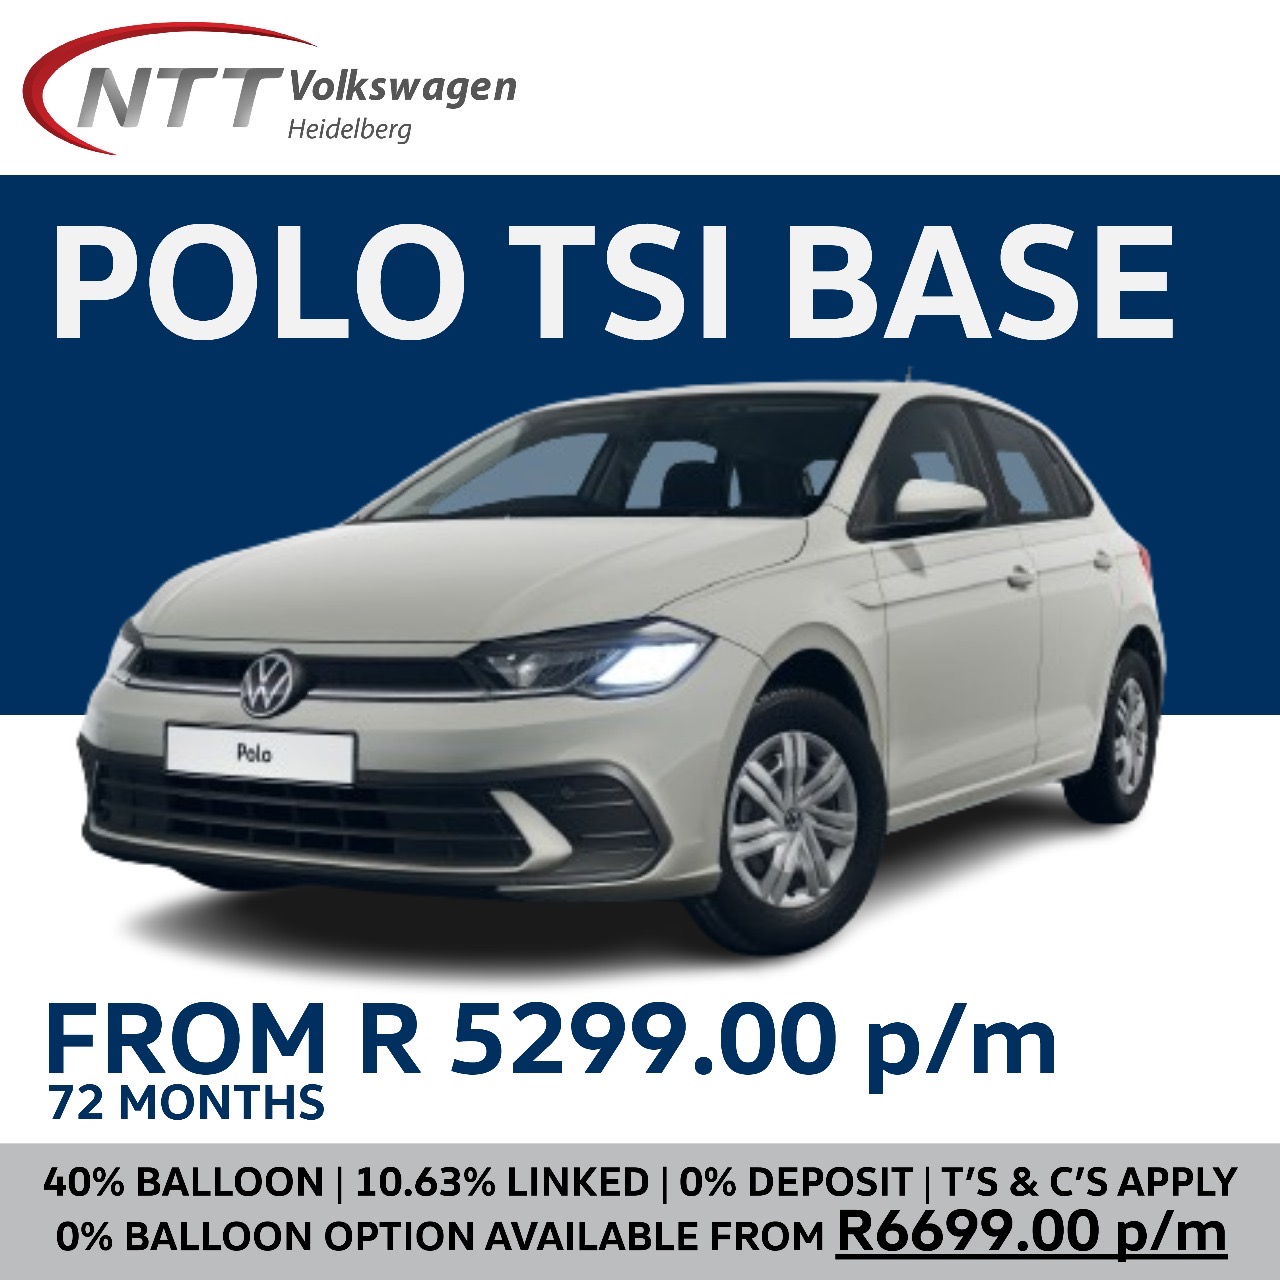 POLO TSI BASE - NTT Volkswagen - New, Used & Demo Cars for Sale in South Africa